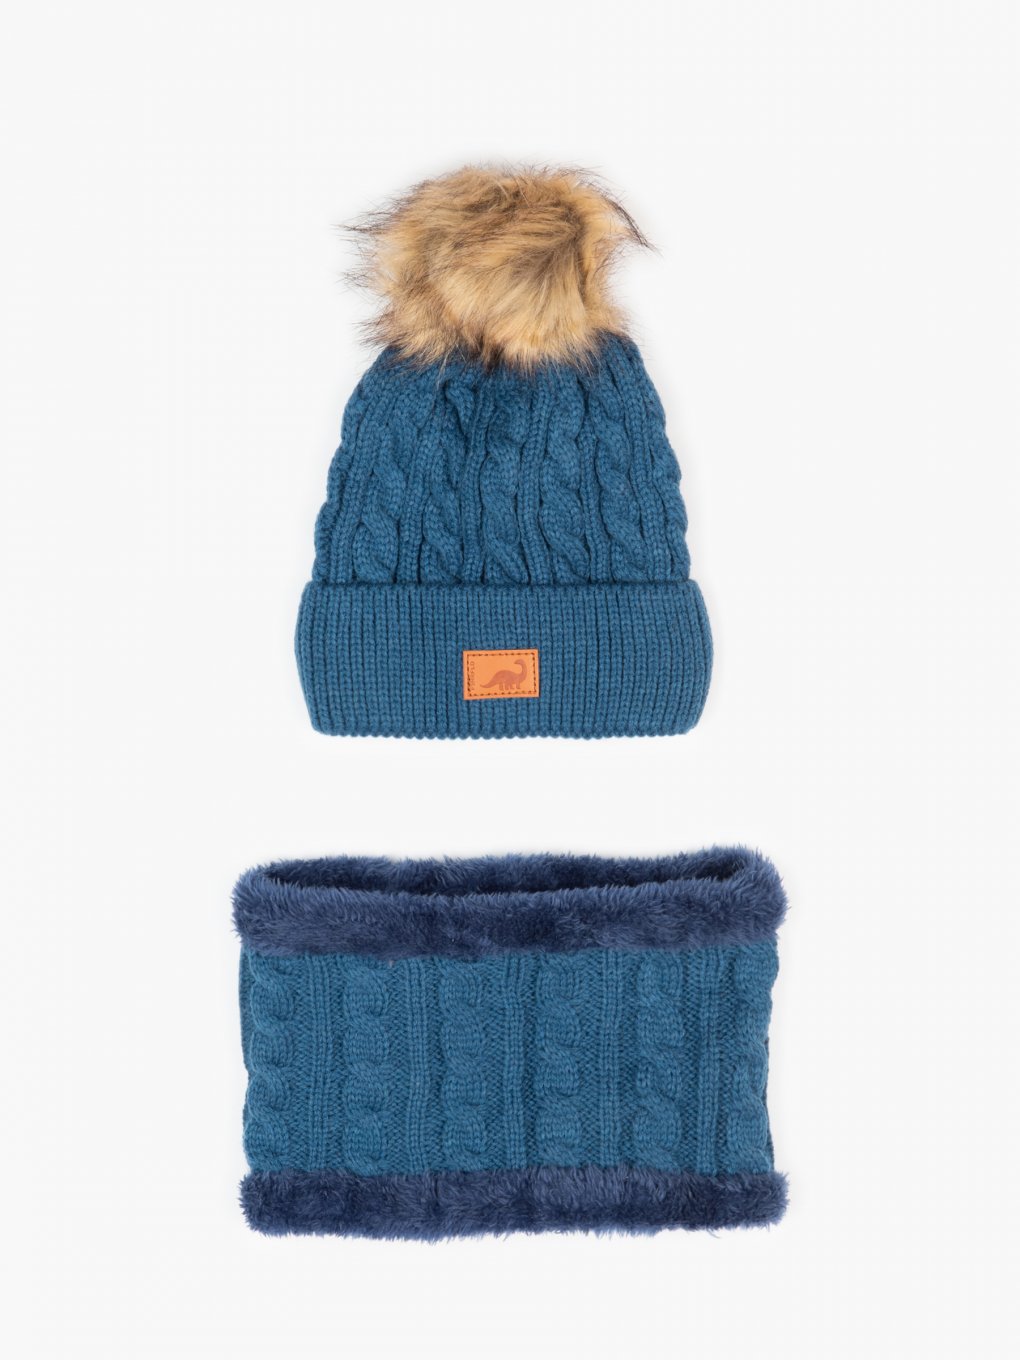 Cable knit cap with pom pom and scarf